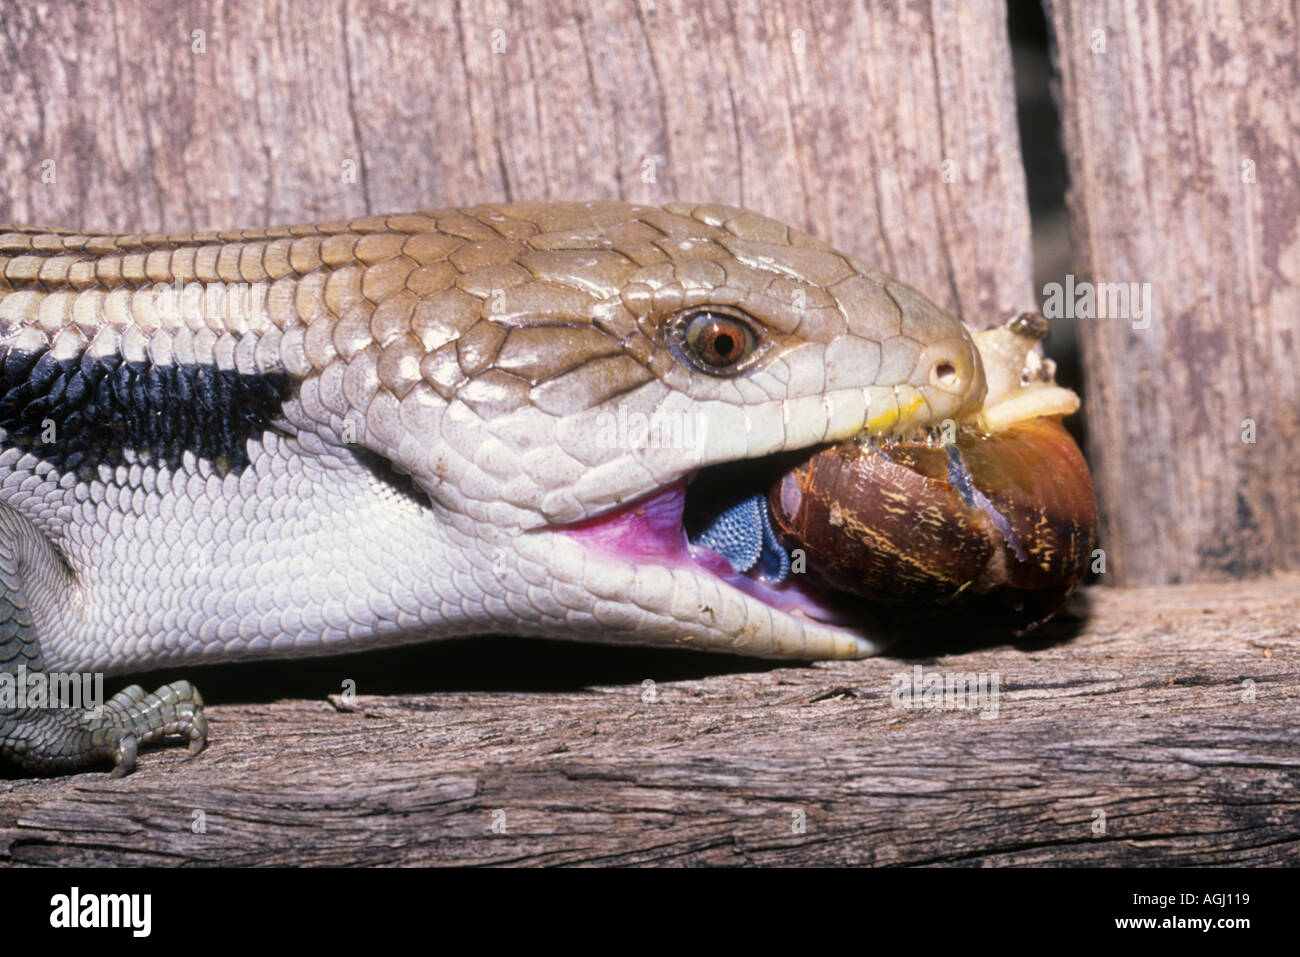 an Eastern Blue Tongue Lizard, Tiliqua scincoides scincoides, eating a snail. They are the largest member of the skink family. Stock Photo